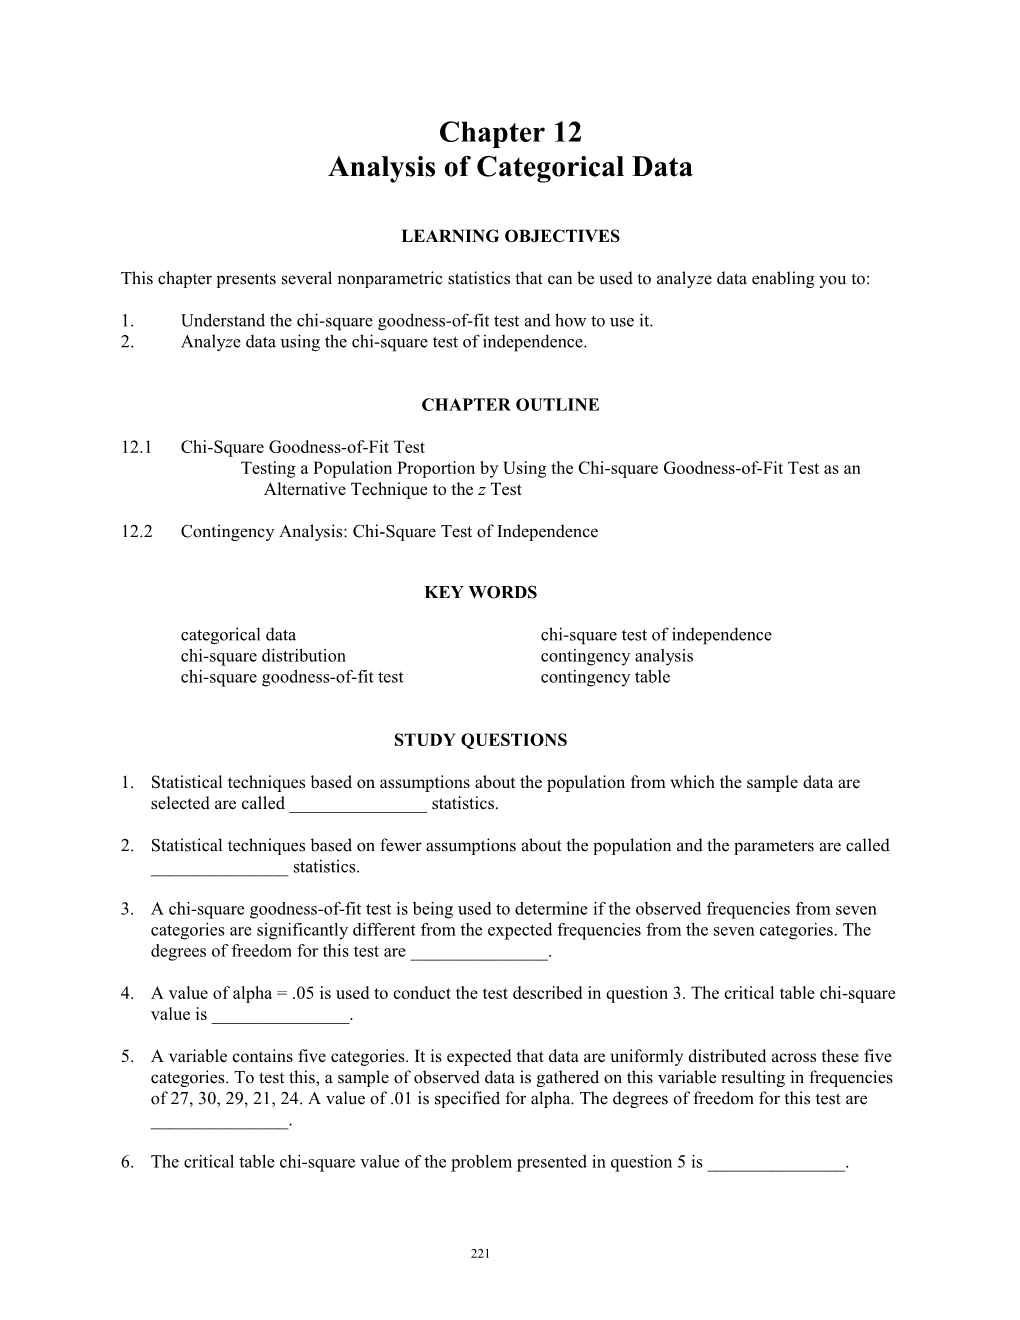 Chapter 12: Analysis of Categorical Data 239